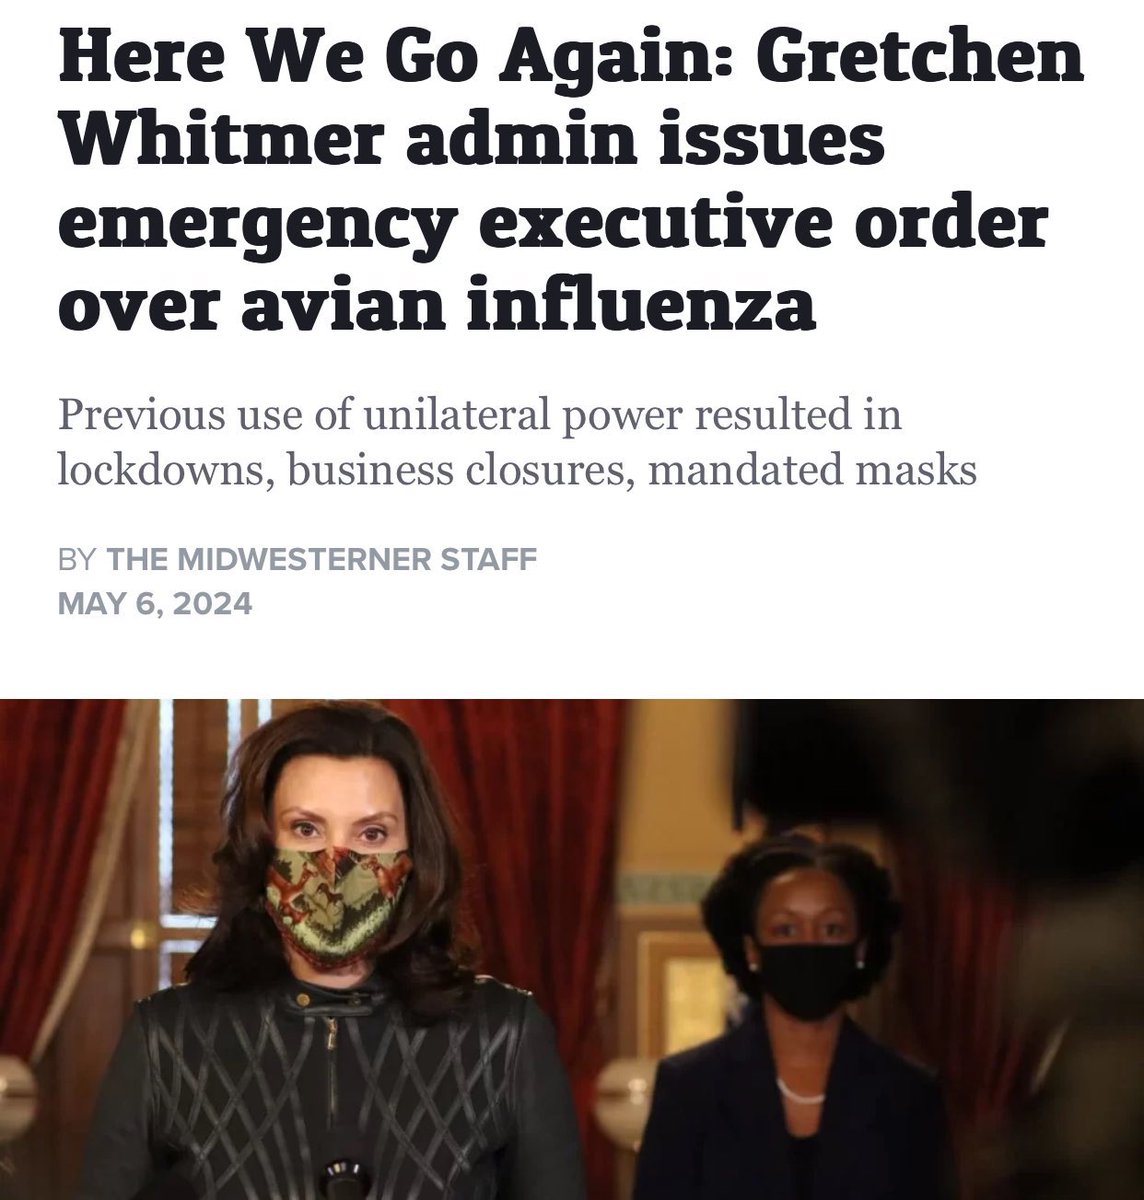 WARNING:  One by one, governors are going to start declaring public health emergencies to release an ending stream of funding and give themselves the power to mandate injections and quarantine

(Remember, H5N1 has not been isolated so no proof it exists)

Whatcha gonna do?